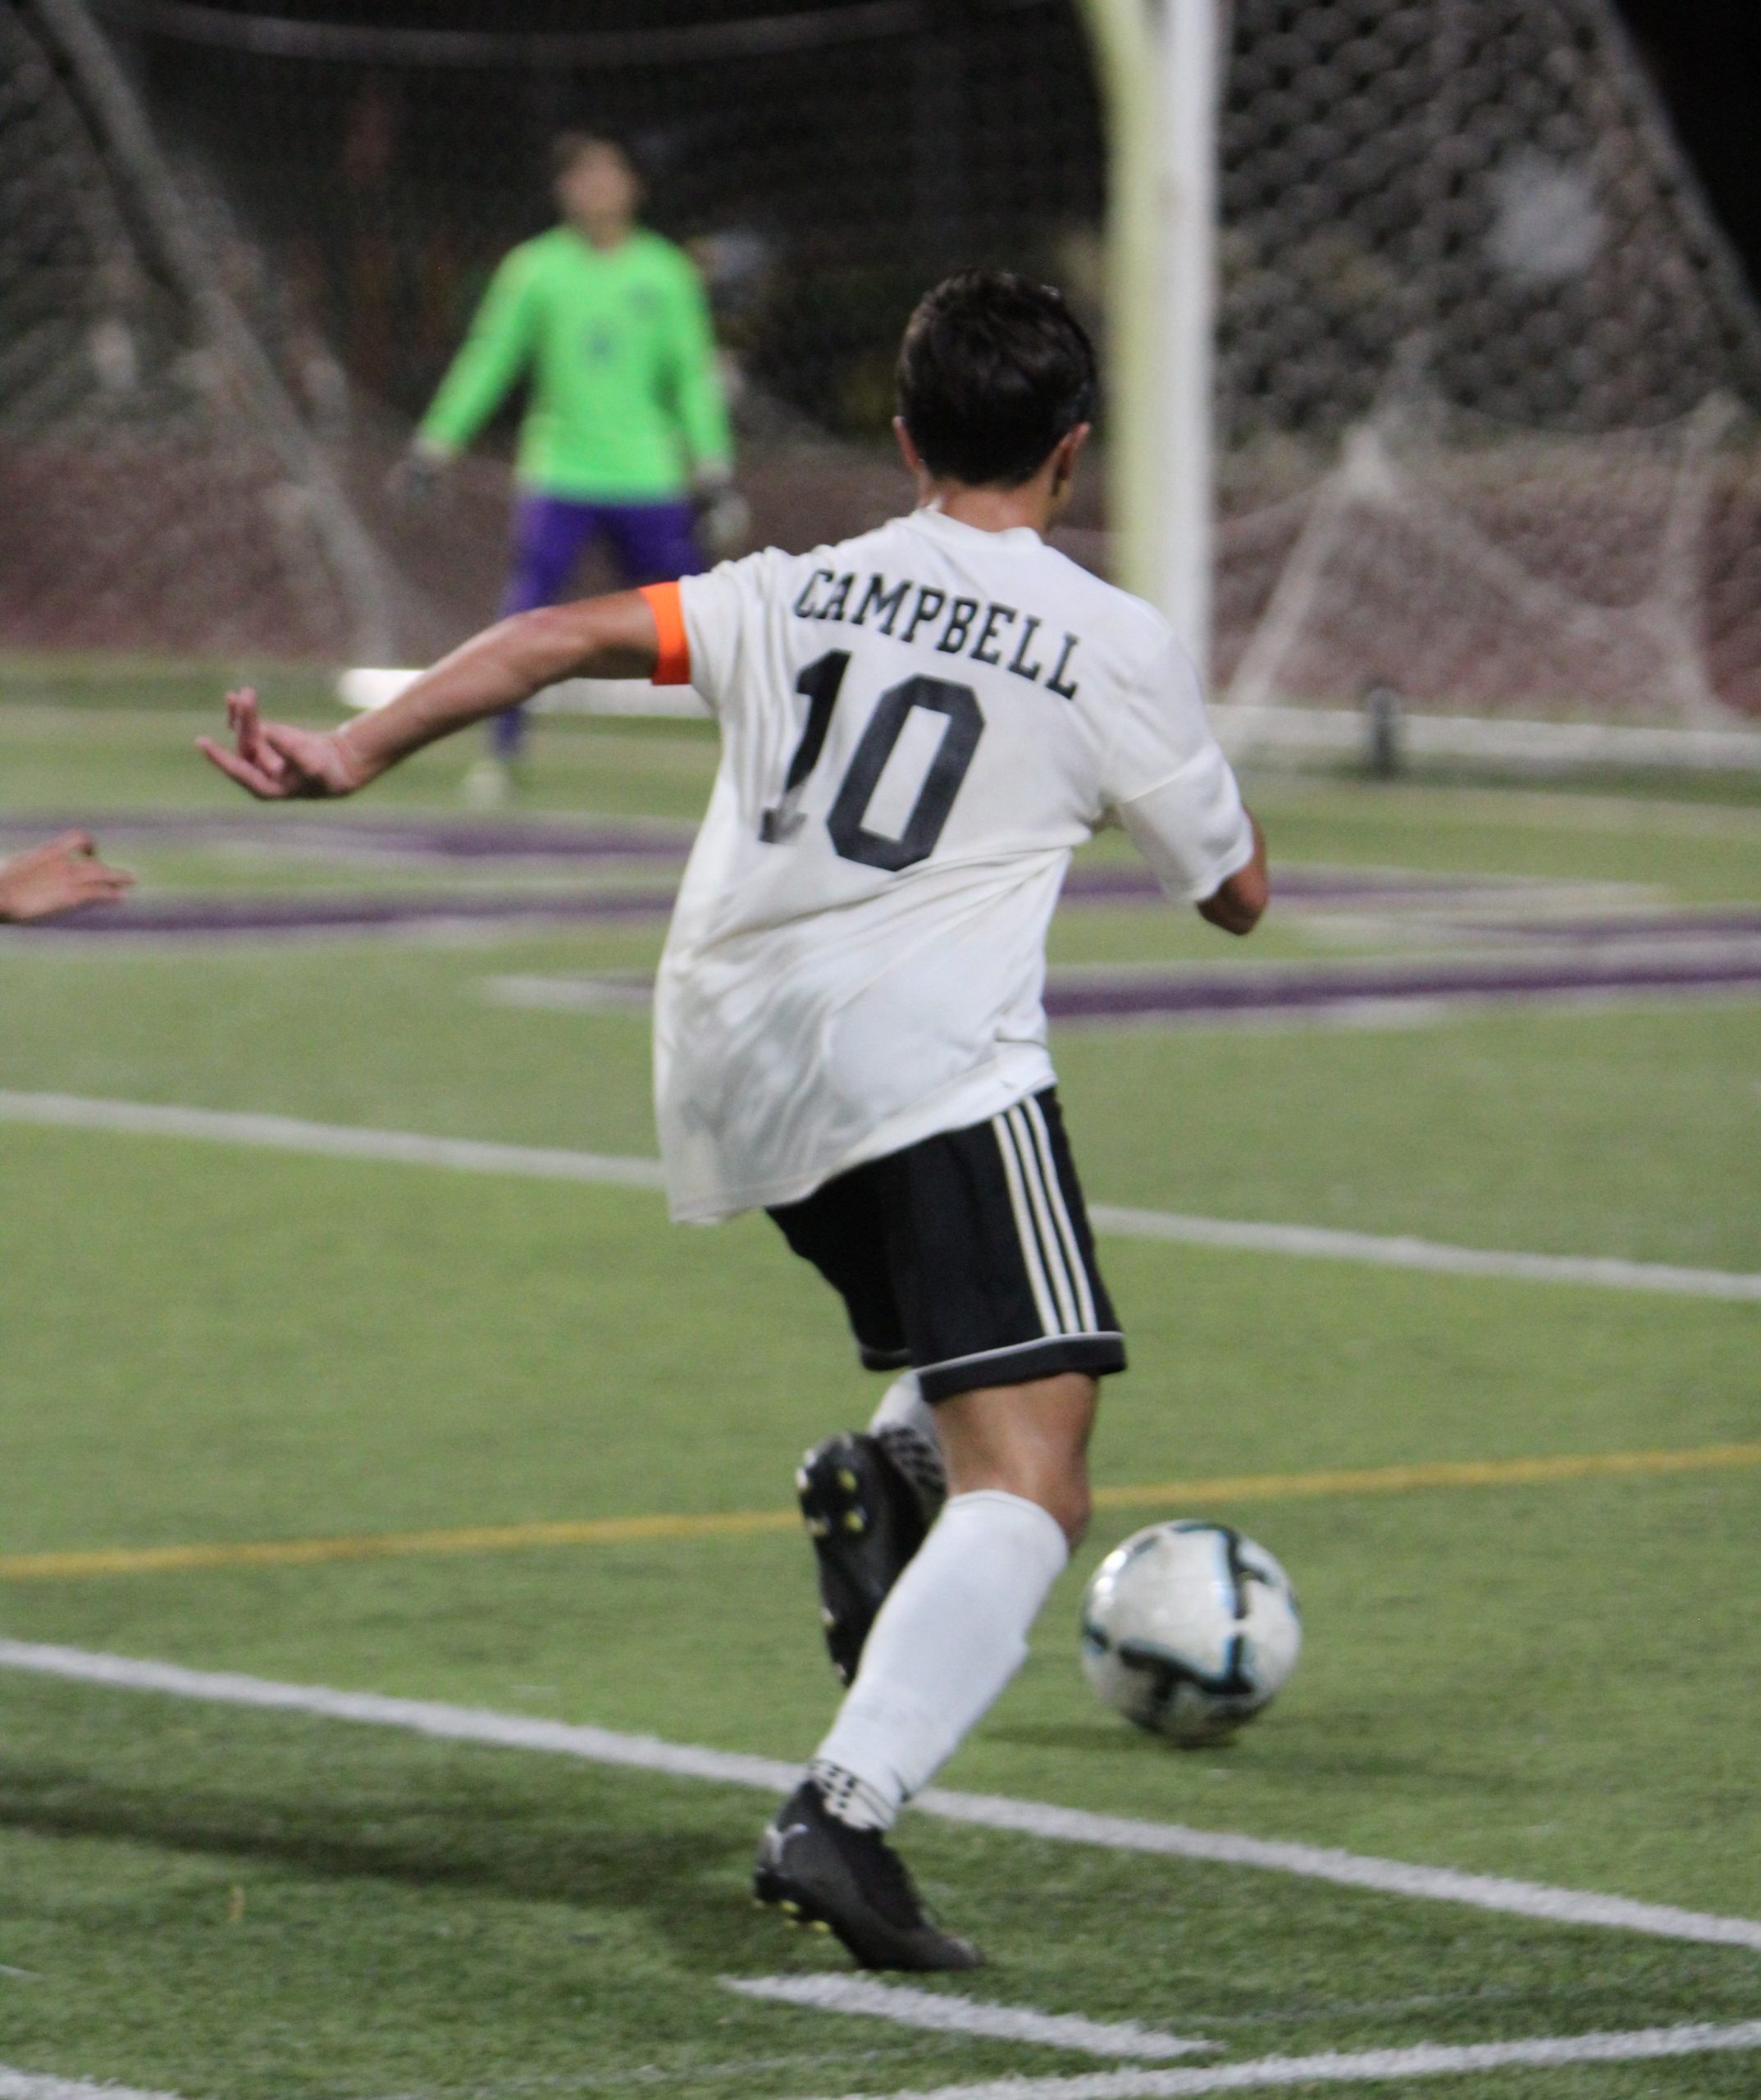 Pearl City drops below .500 in league play with 3-1 loss to Campbell